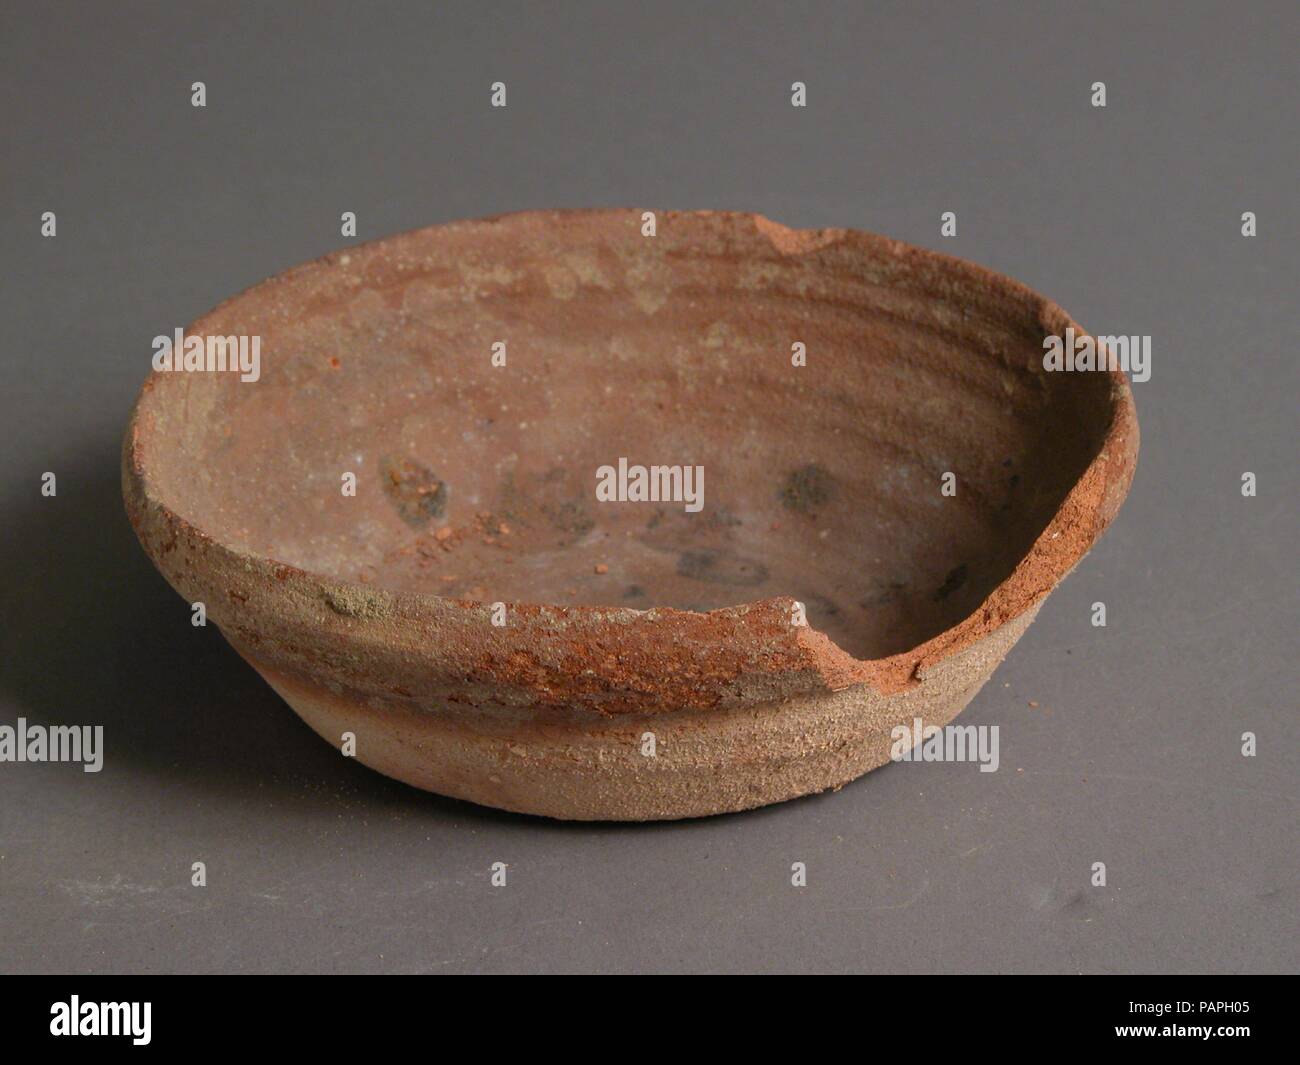 Bowl. Culture: Coptic. Dimensions: Overall: 1 11/16 x 5 5/16 in. (4.3 x 13.5 cm). Date: 4th-7th century. Museum: Metropolitan Museum of Art, New York, USA. Stock Photo